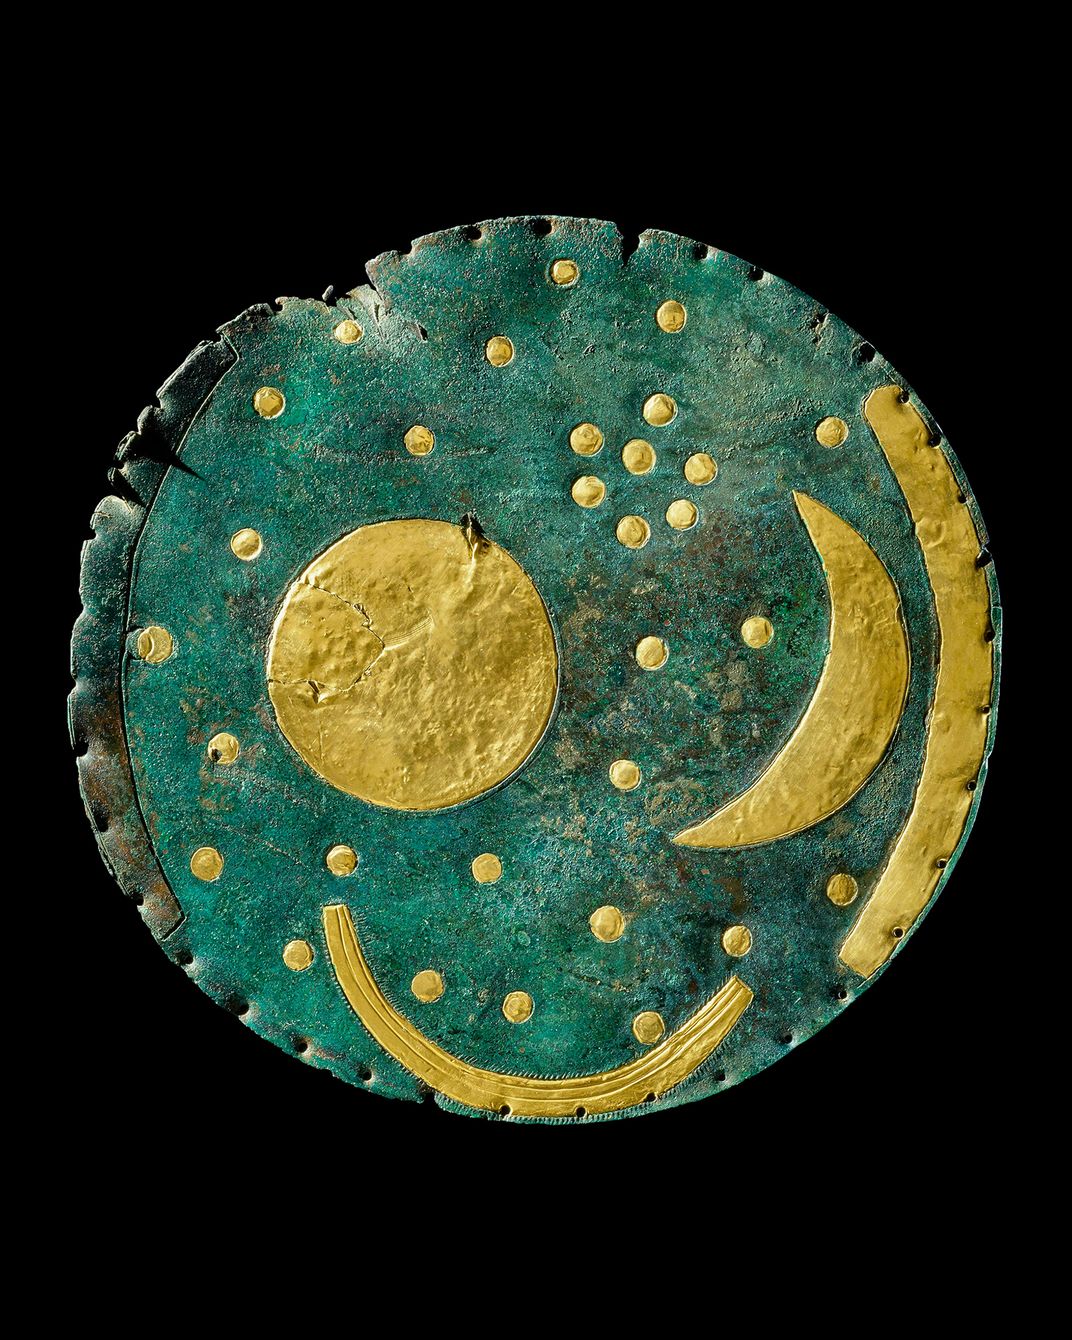 blue disc with brass colored depictions of sun, stars and moon